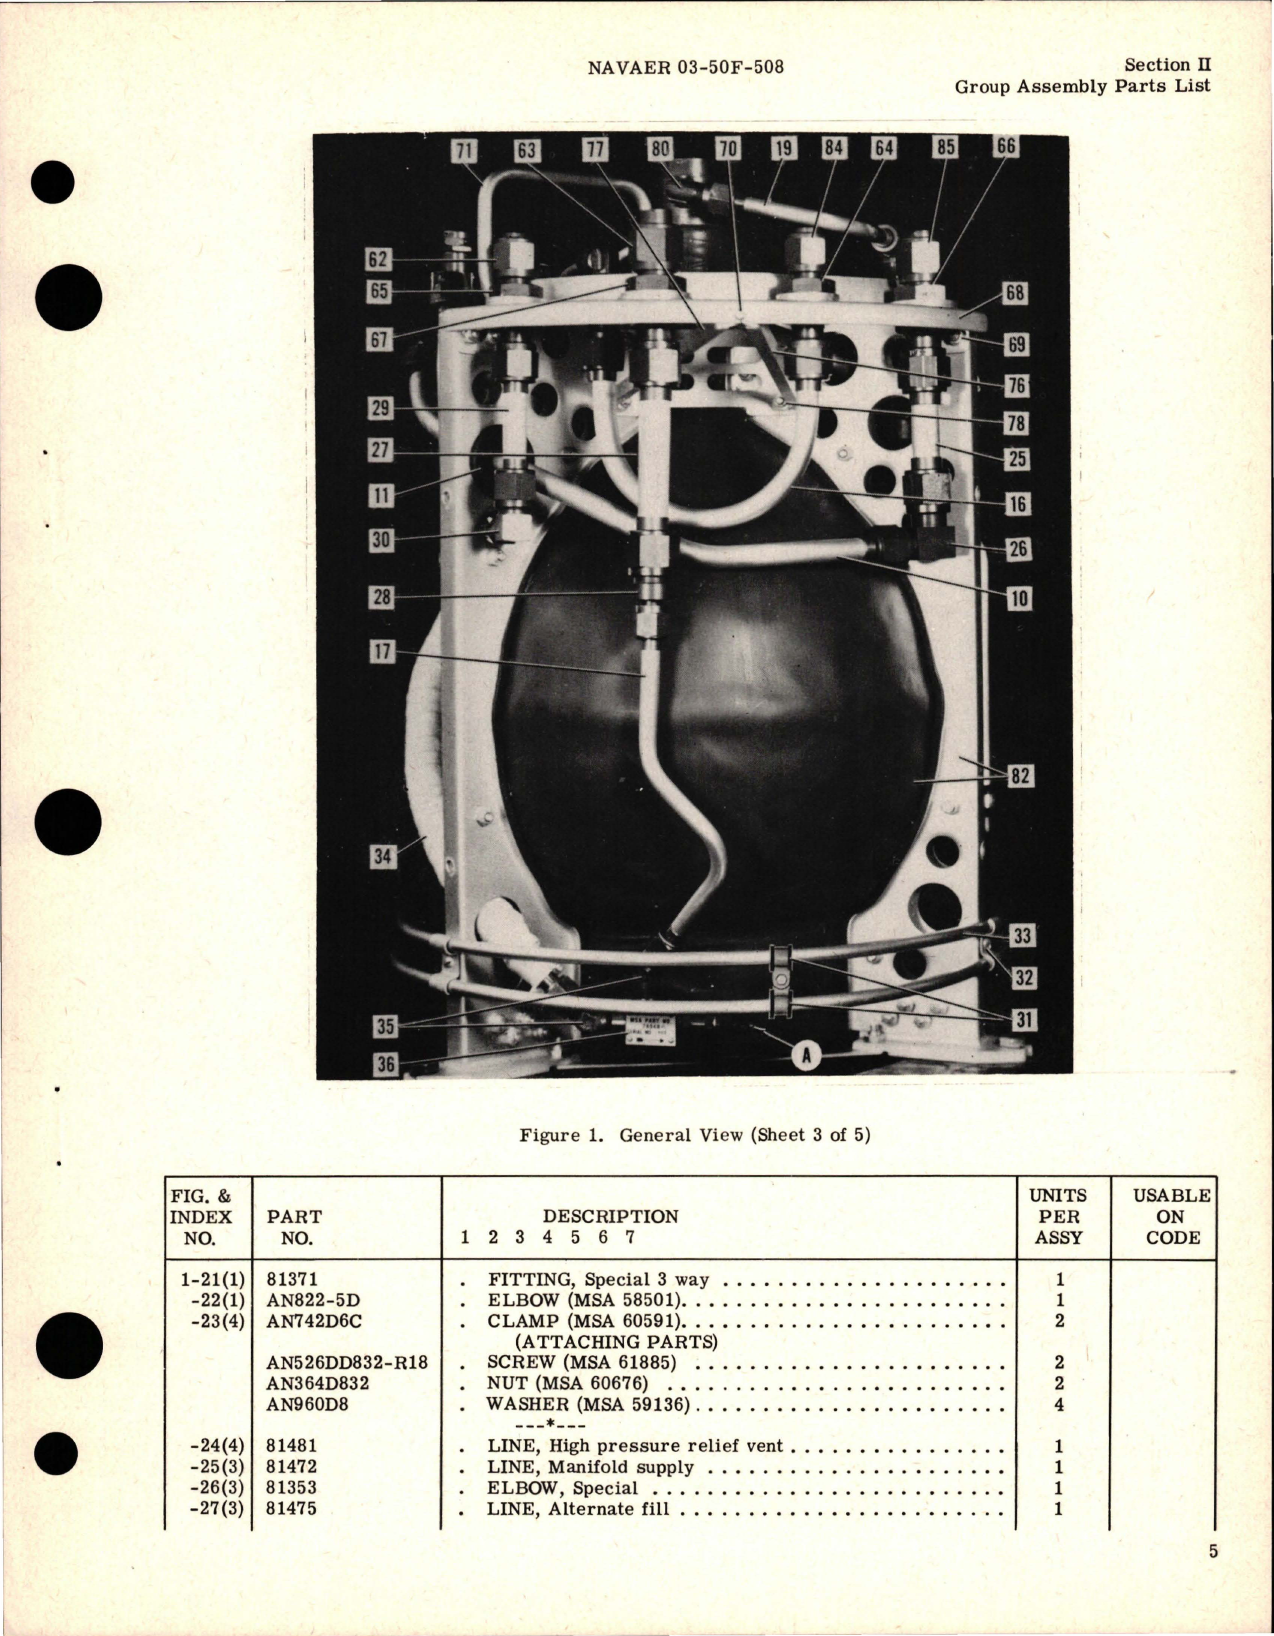 Sample page 7 from AirCorps Library document: Illustrated Parts Breakdown for Liquid Oxygen Converter Assembly - 78113-A